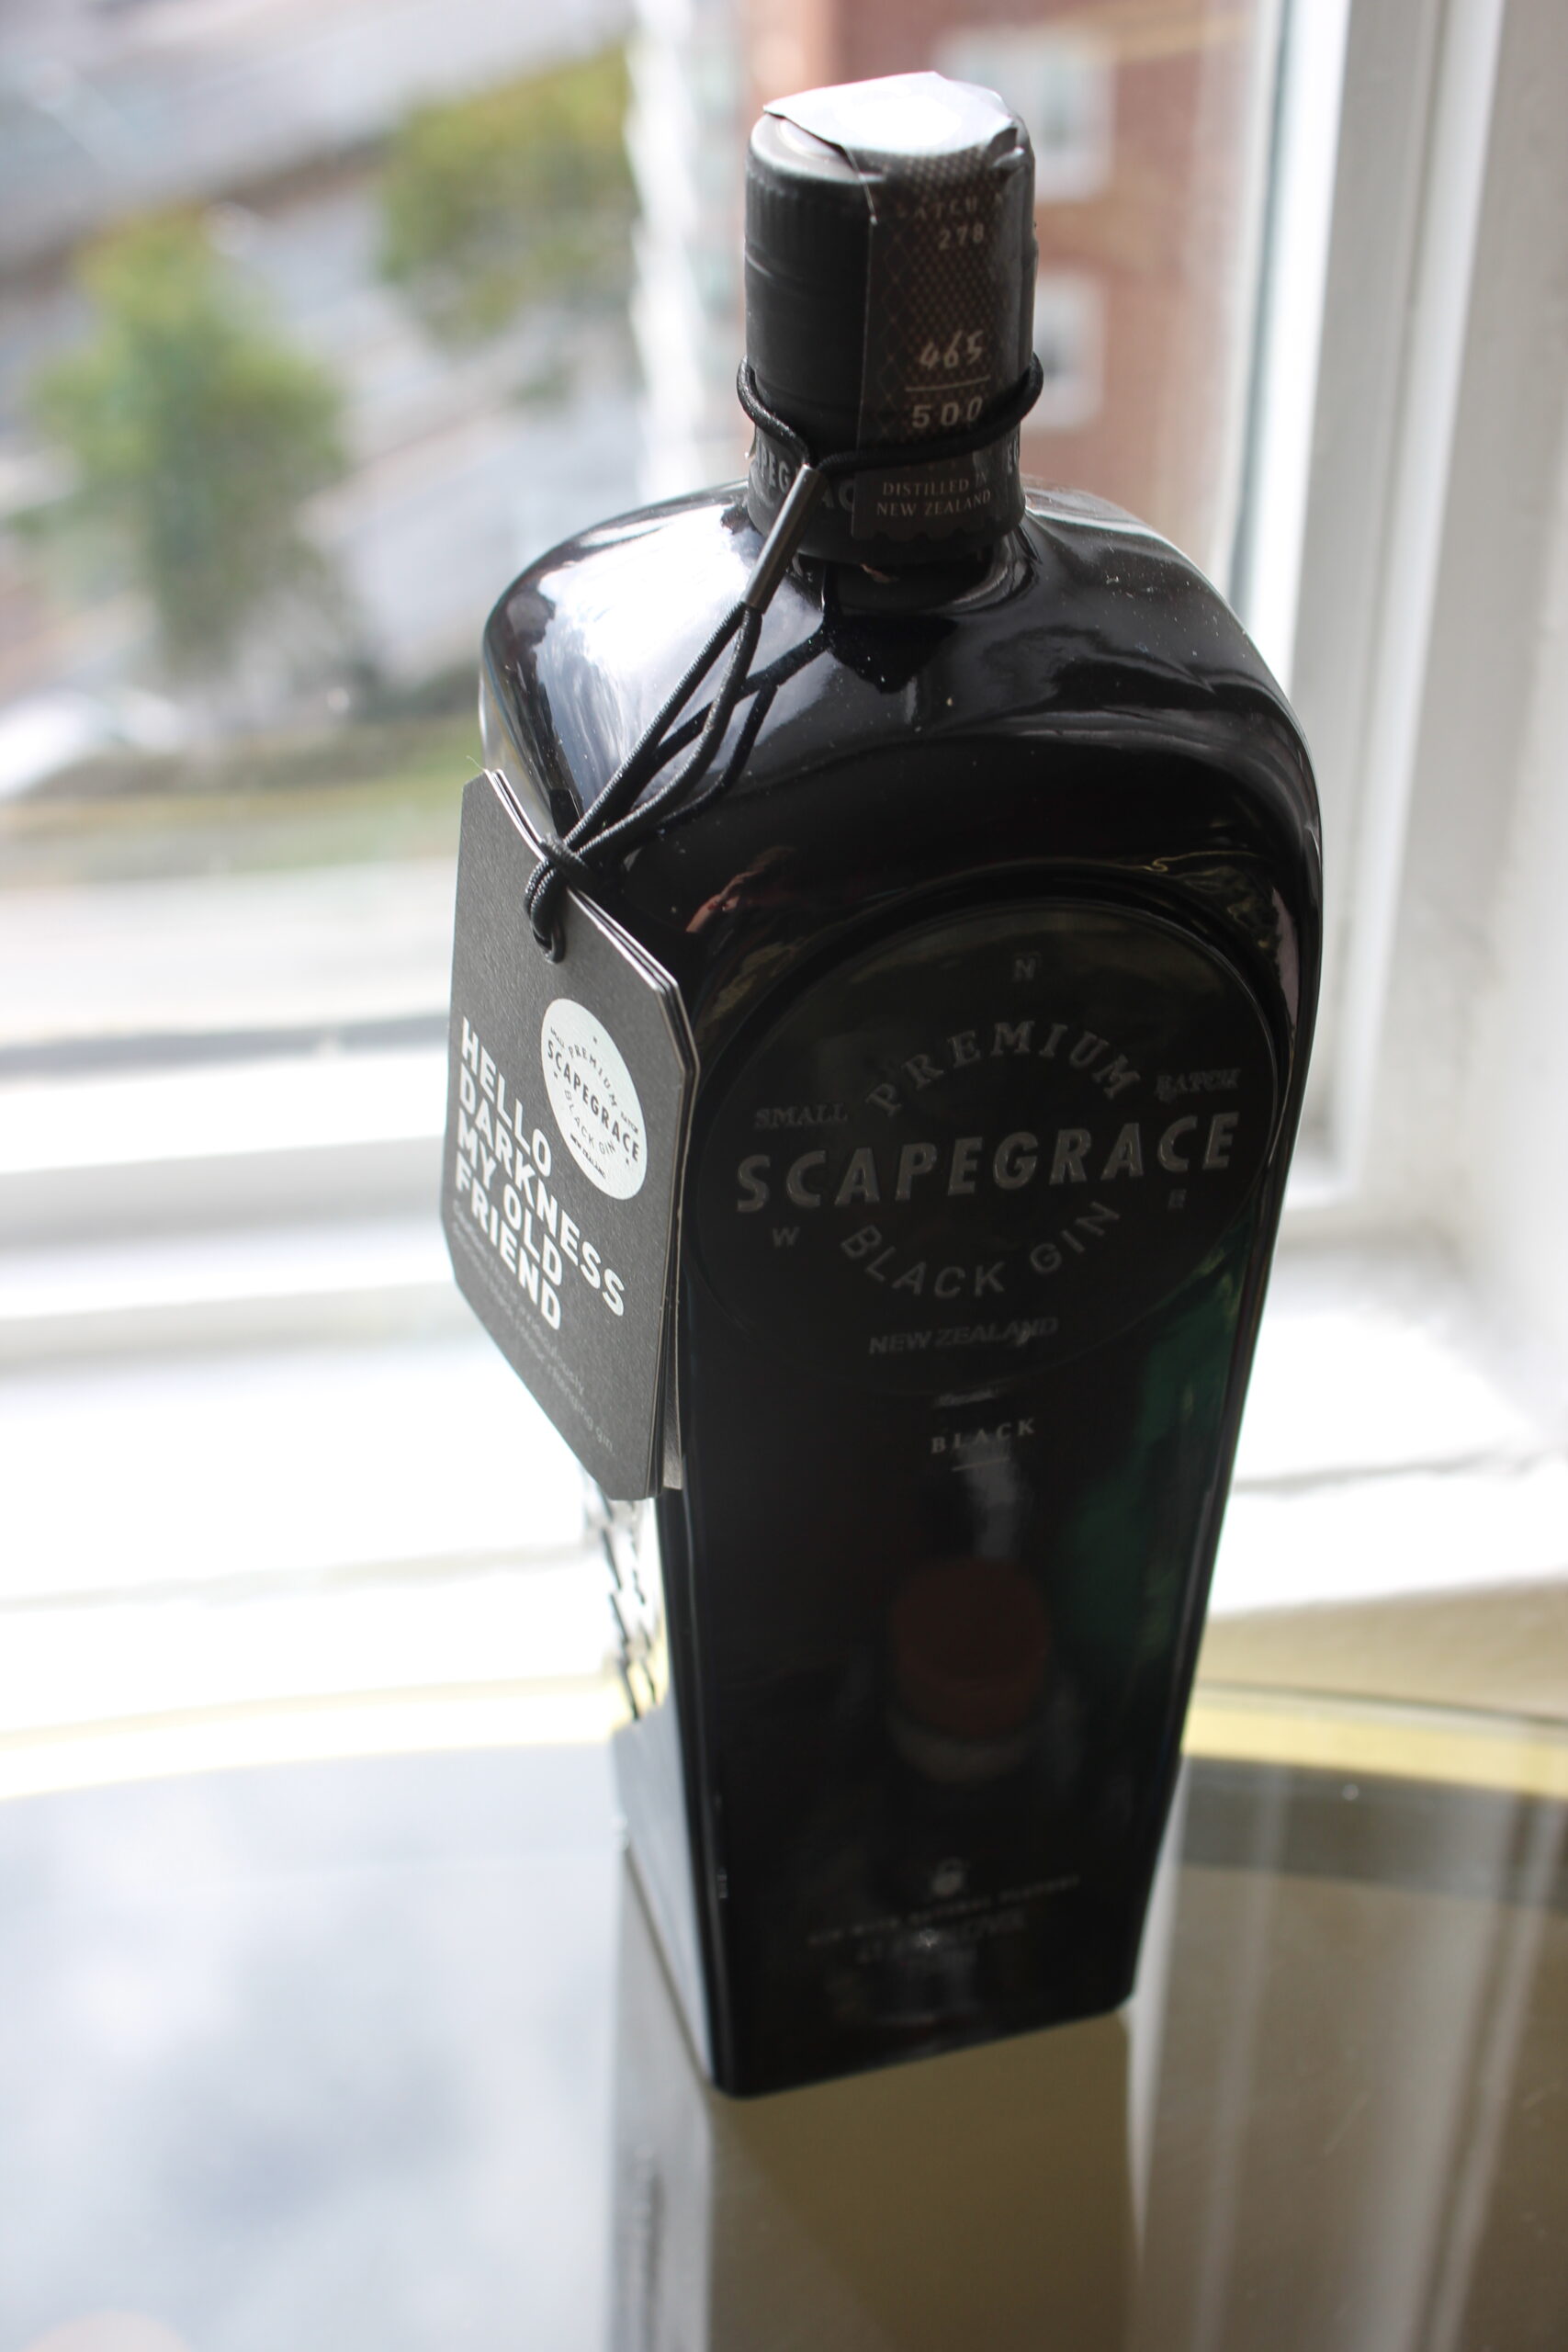 The World’s First Naturally Black Gin